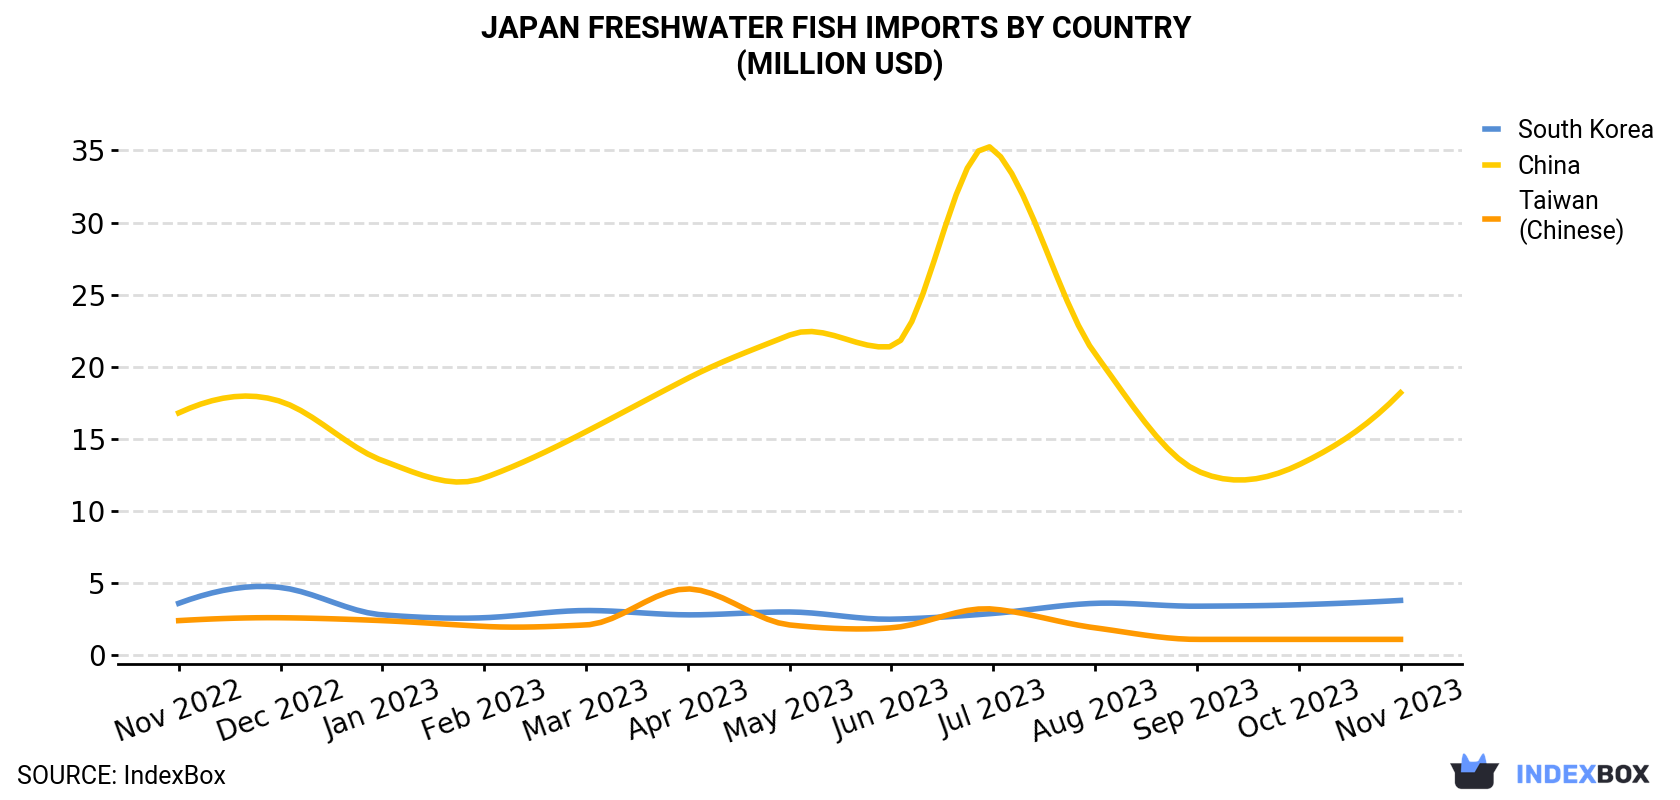 Japan Freshwater Fish Imports By Country (Million USD)